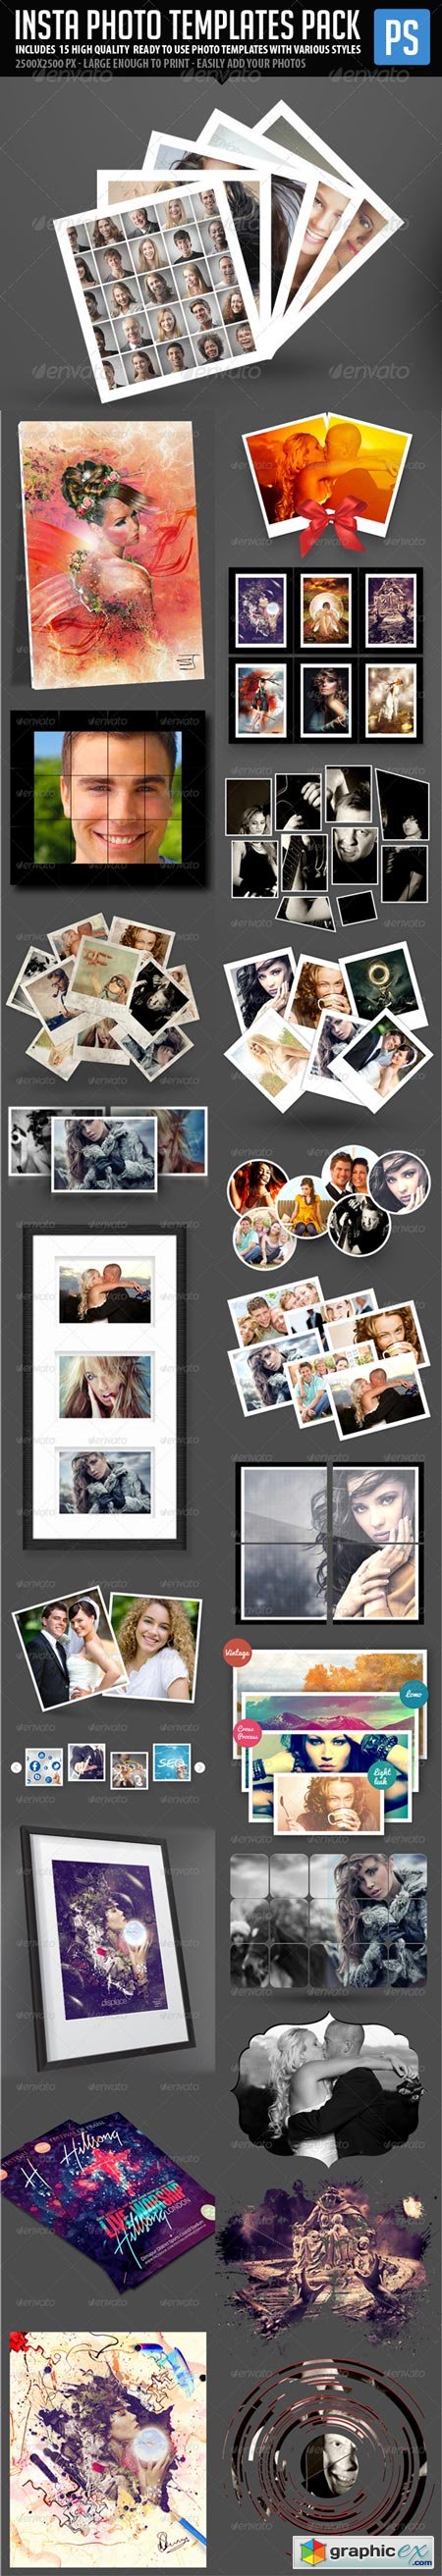 Insta Photo Templates Pack (23in1) 6063139